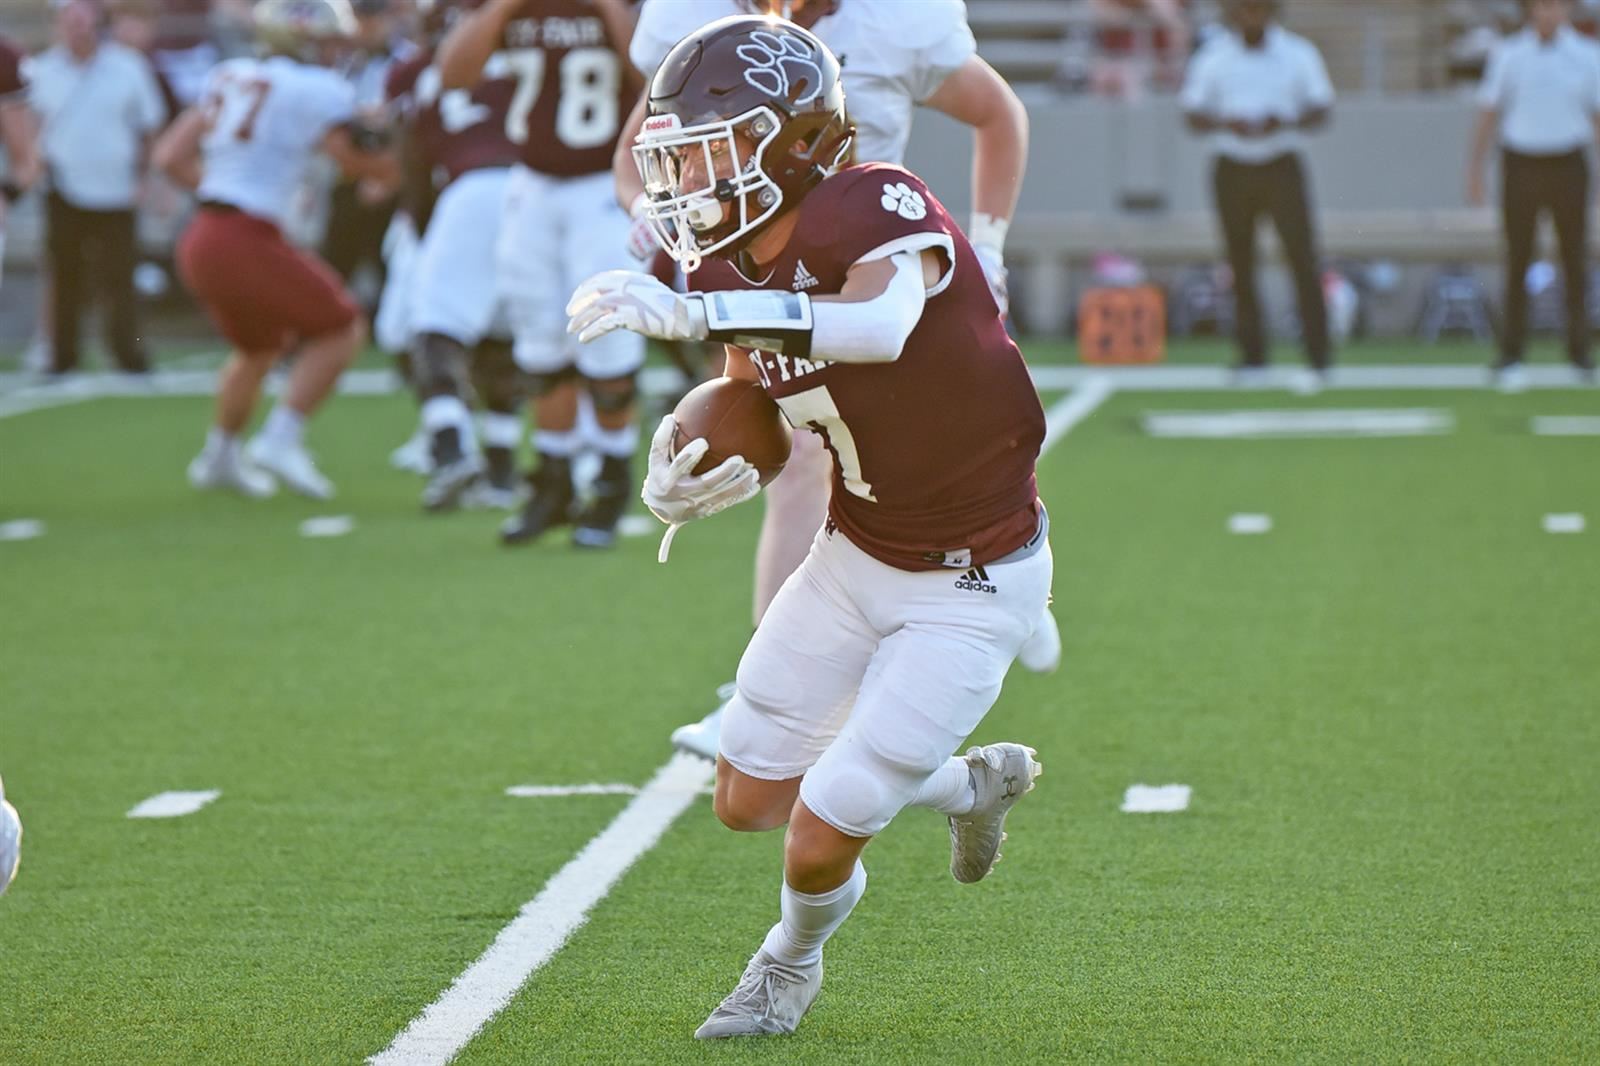 Cy-Fair High School junior Connor Porter was voted the District 17-6A Offensive Newcomer of the Year.